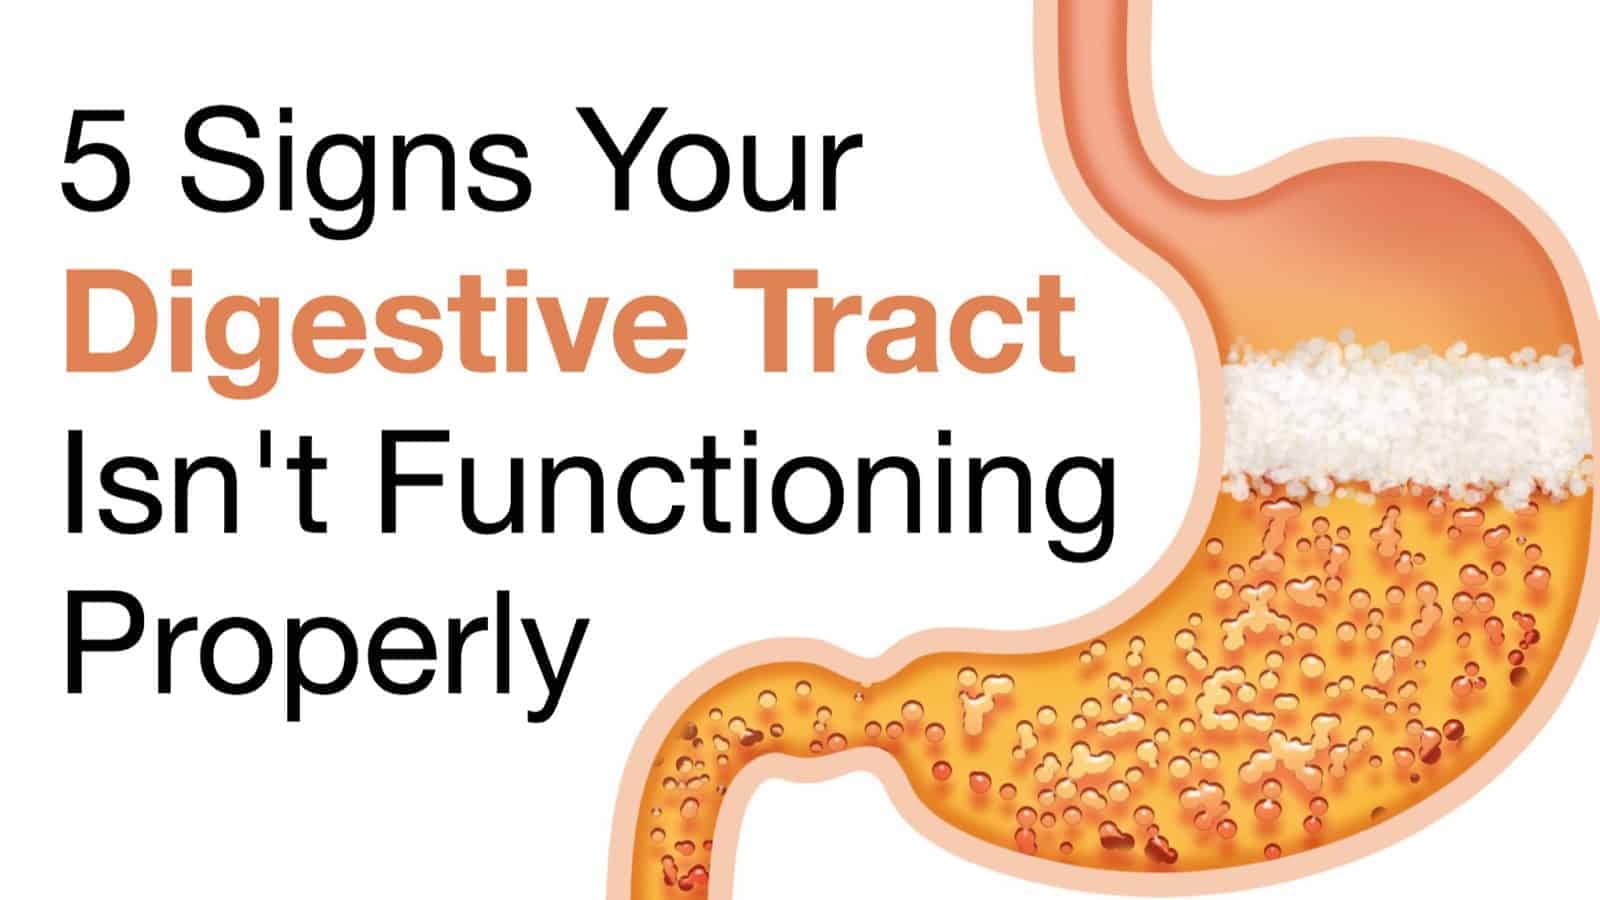 5 Warning Signs Your Digestive Tract Isn’t Functioning Properly